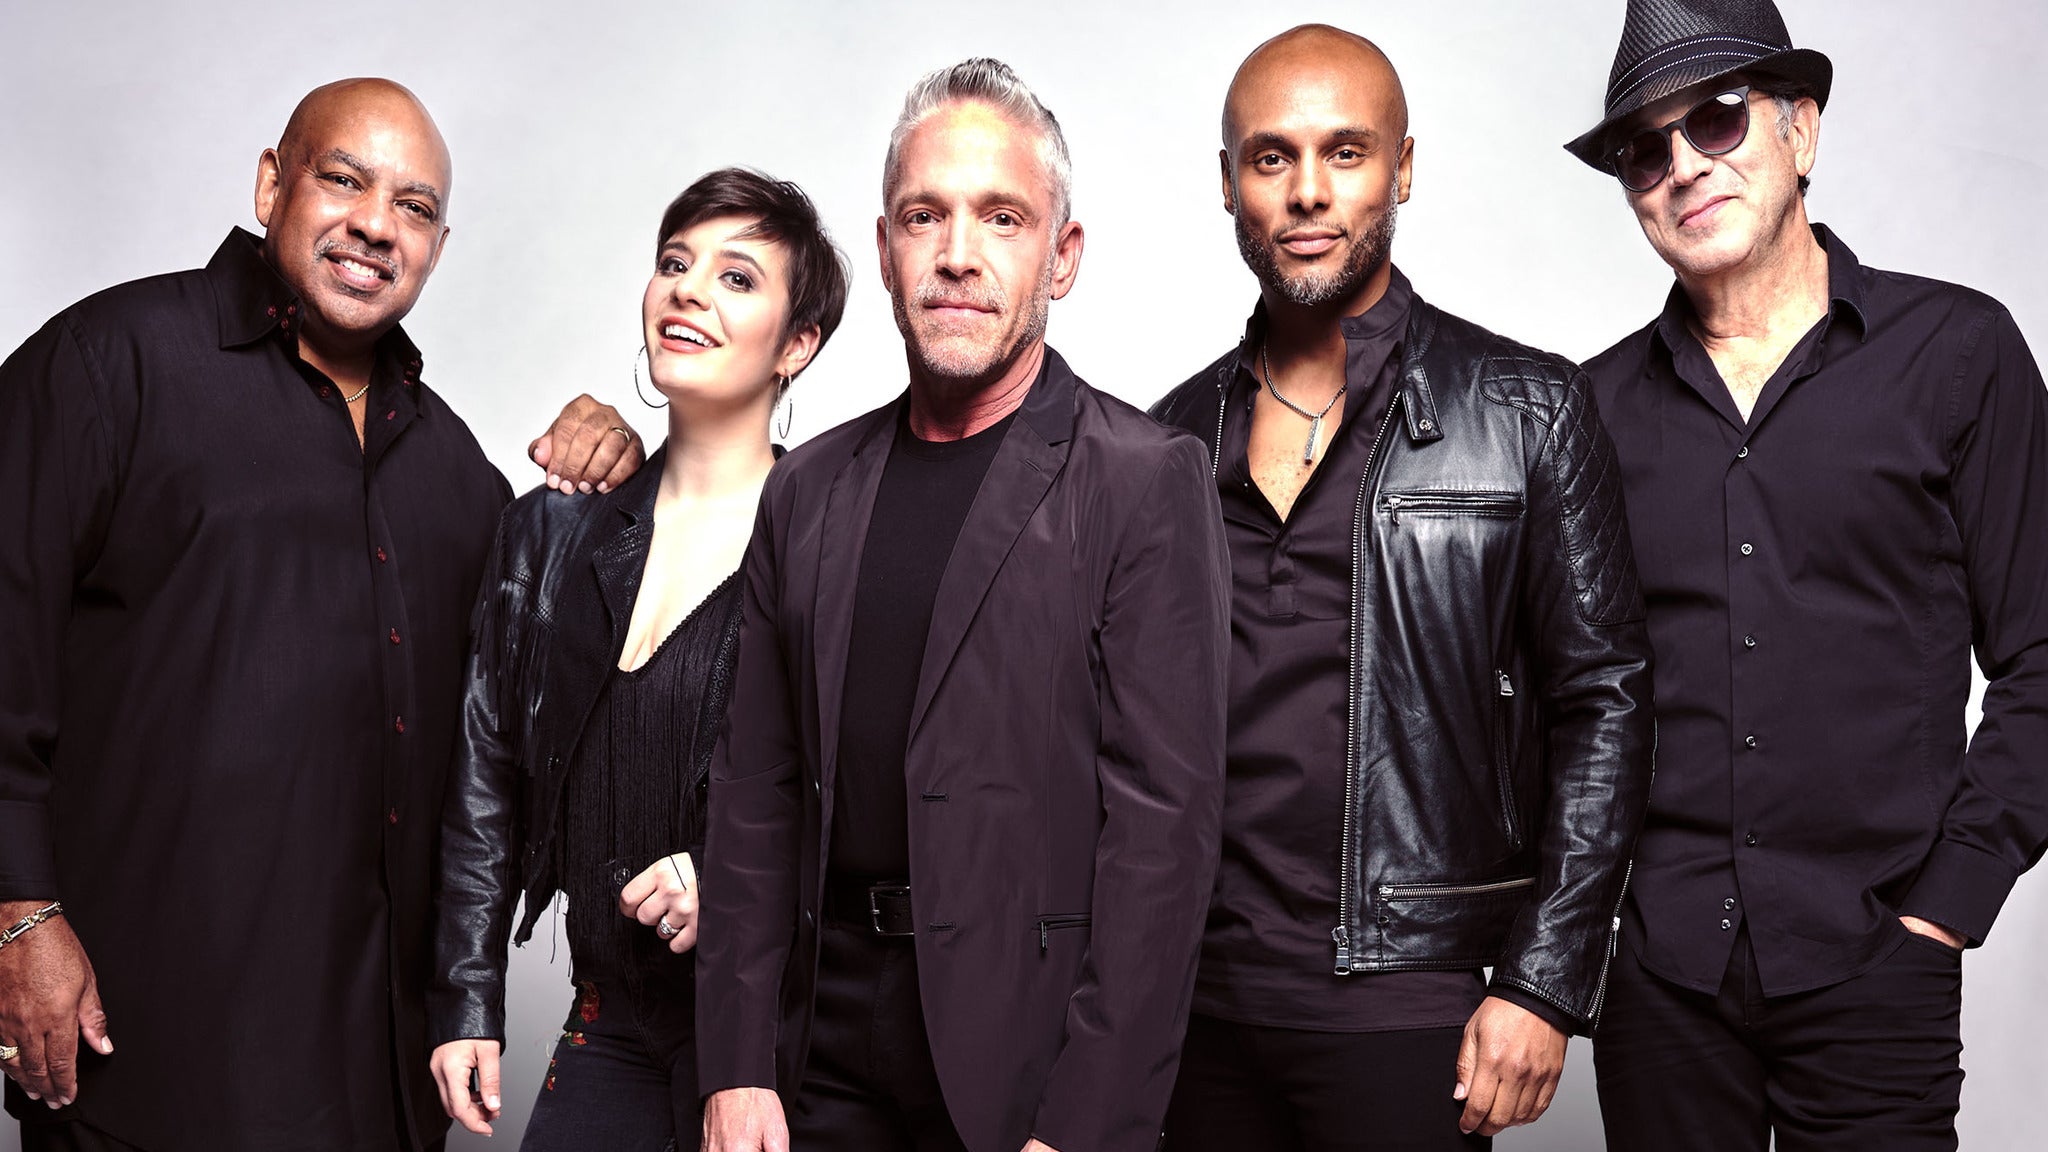 Dave Koz And Friends Summer Horns Tour in National Harbor  promo photo for Live Nation presale offer code